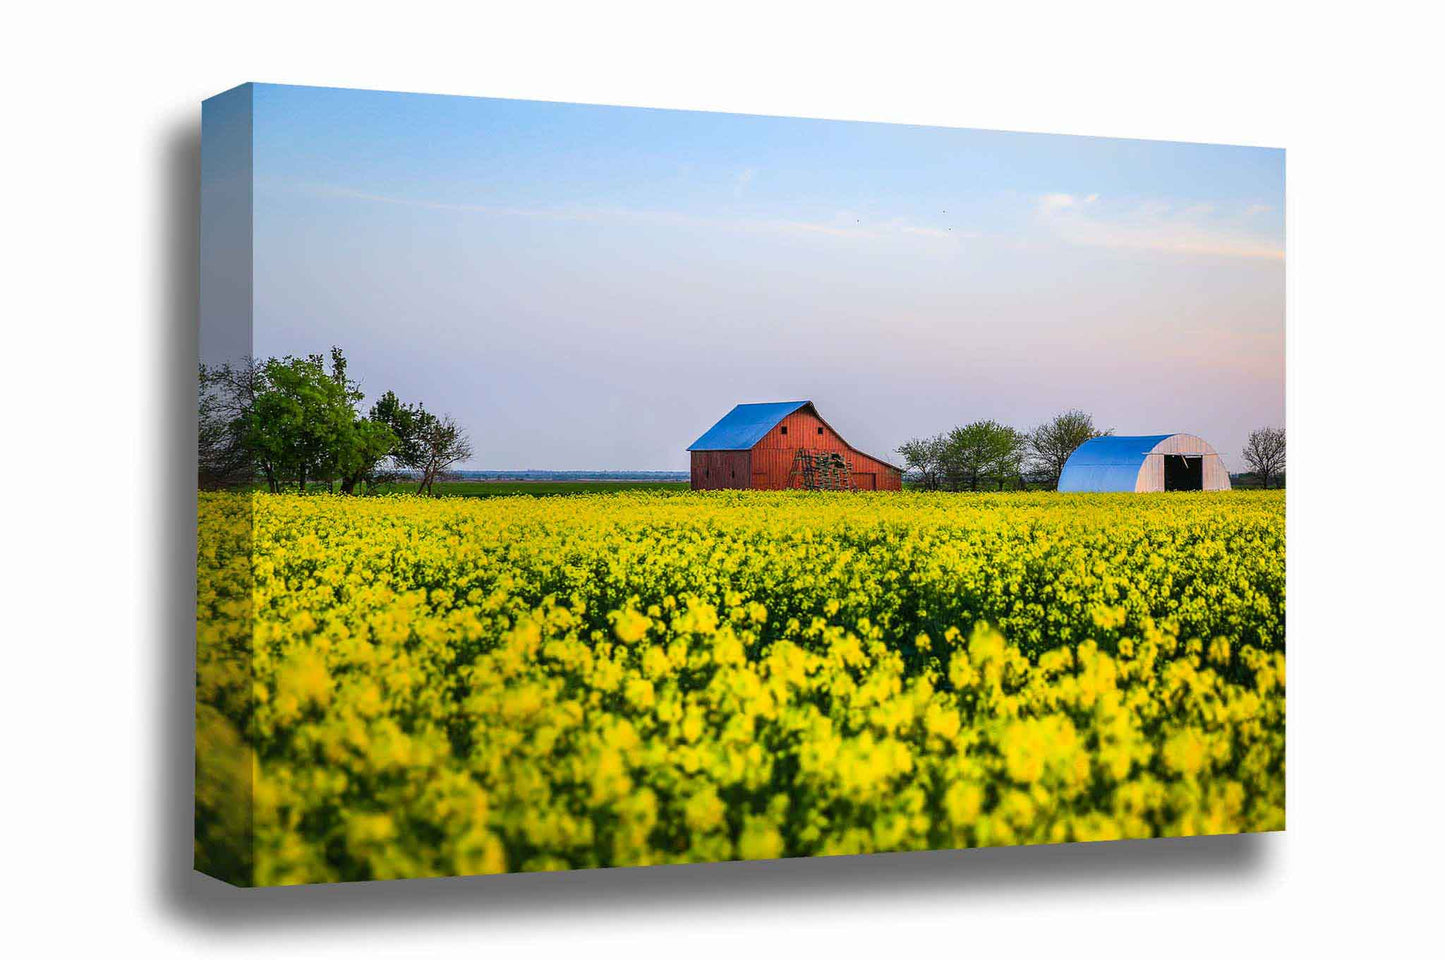 Country canvas wall art of an old red barn nestled in a field of yellow canola at sunset on a farm in Oklahoma by Sean Ramsey of Southern Plains Photography.